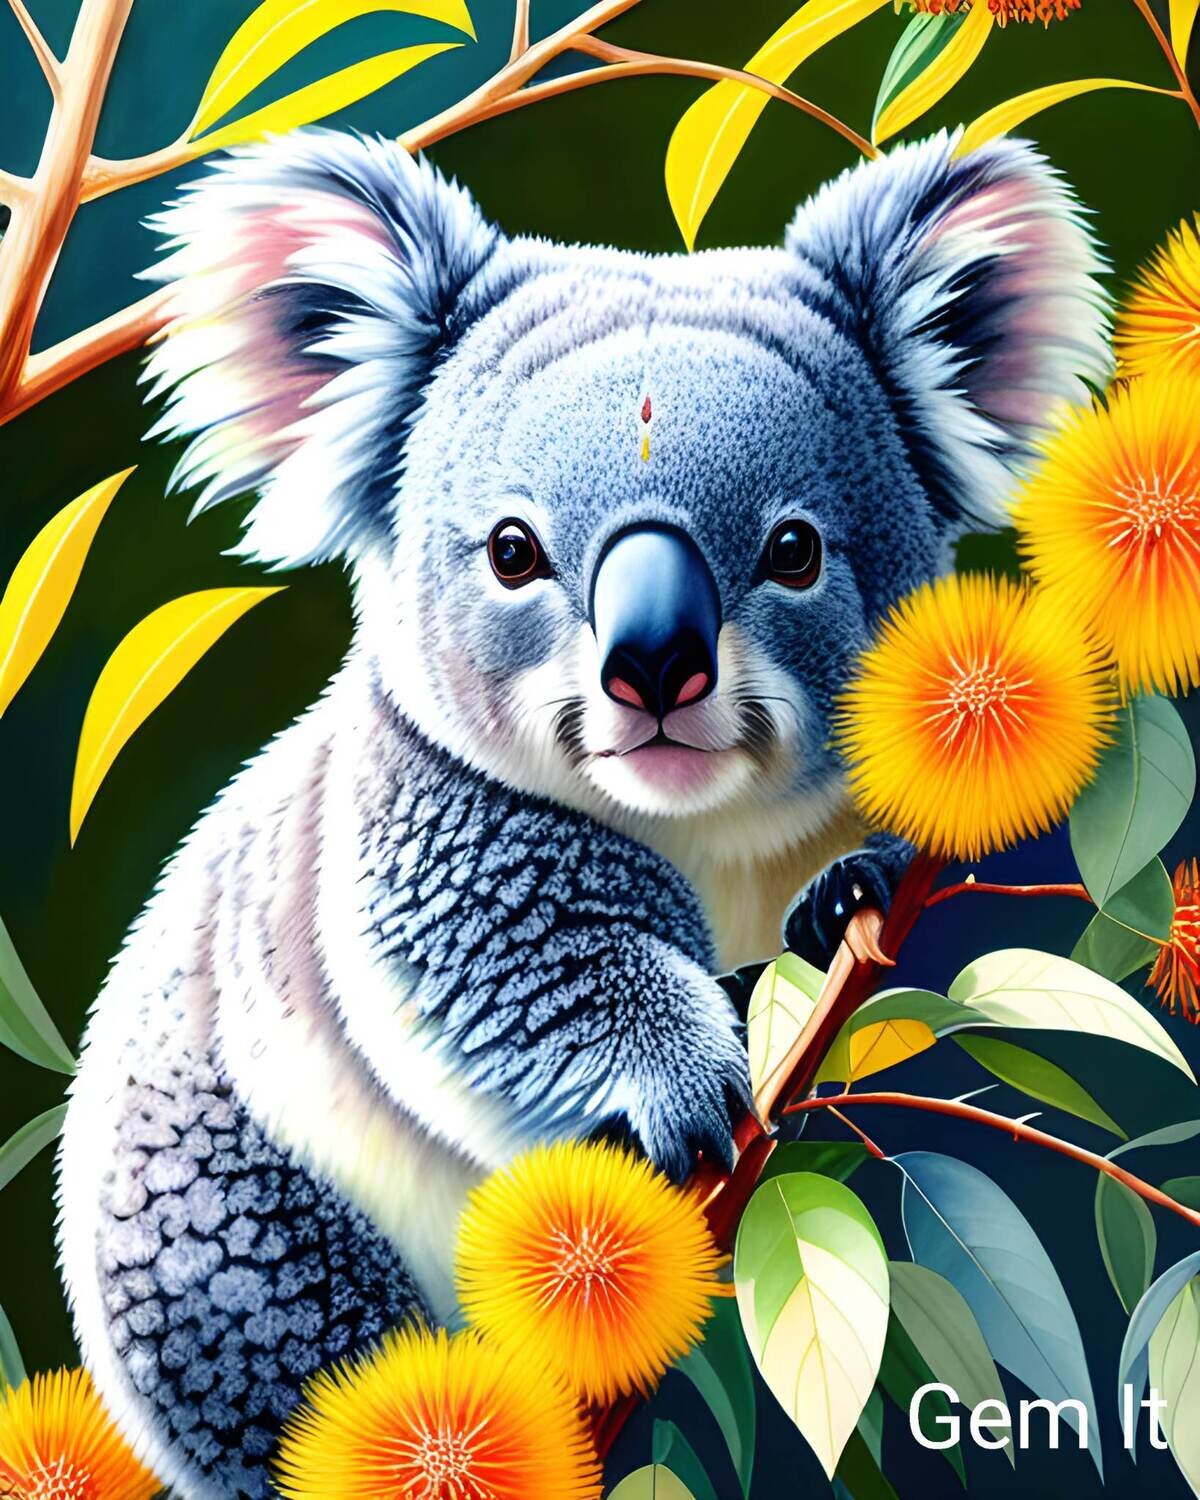 Cute Koala B - Specially ordered for you. Delivery is approximately 4 - 6 weeks.